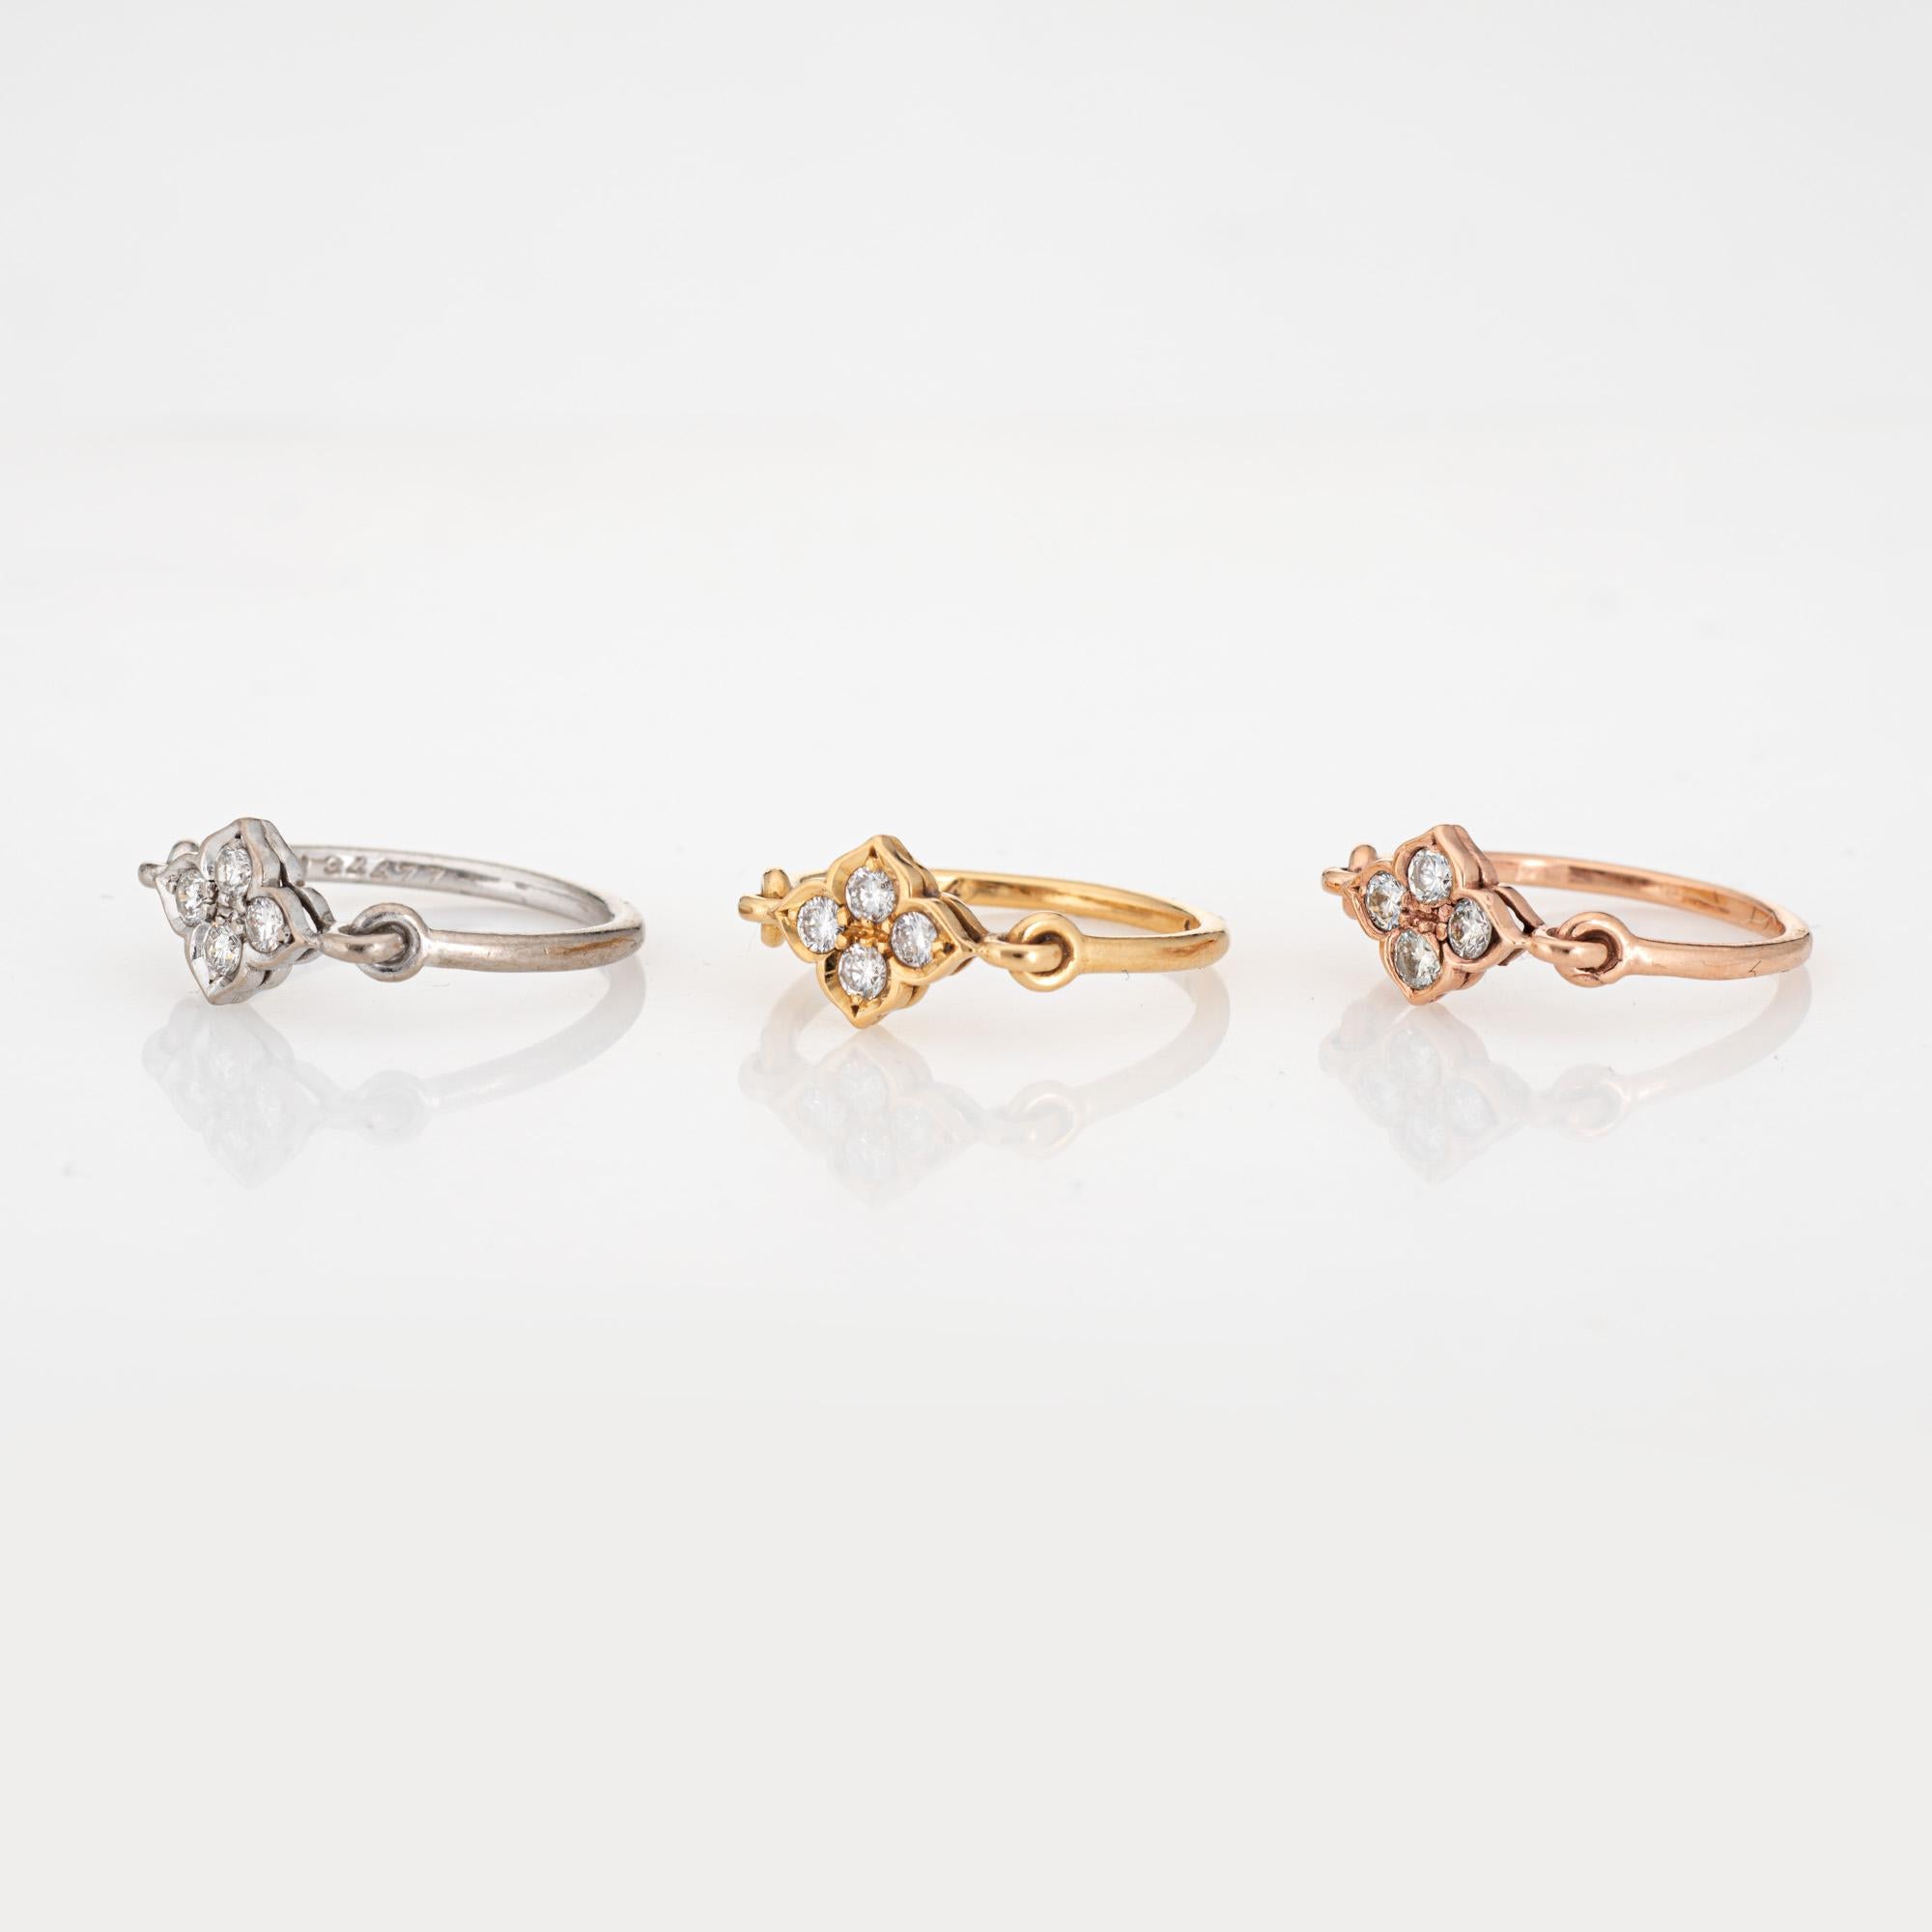 Pre owned set of 3 Cartier Hindu diamond rings crafted in 18 karat white, rose and yellow gold.  

Twelve round brilliant cut diamonds (4 per ring) total an estimated 0.36 carats (estimated at F-G color and VVS2 clarity).

The out of production